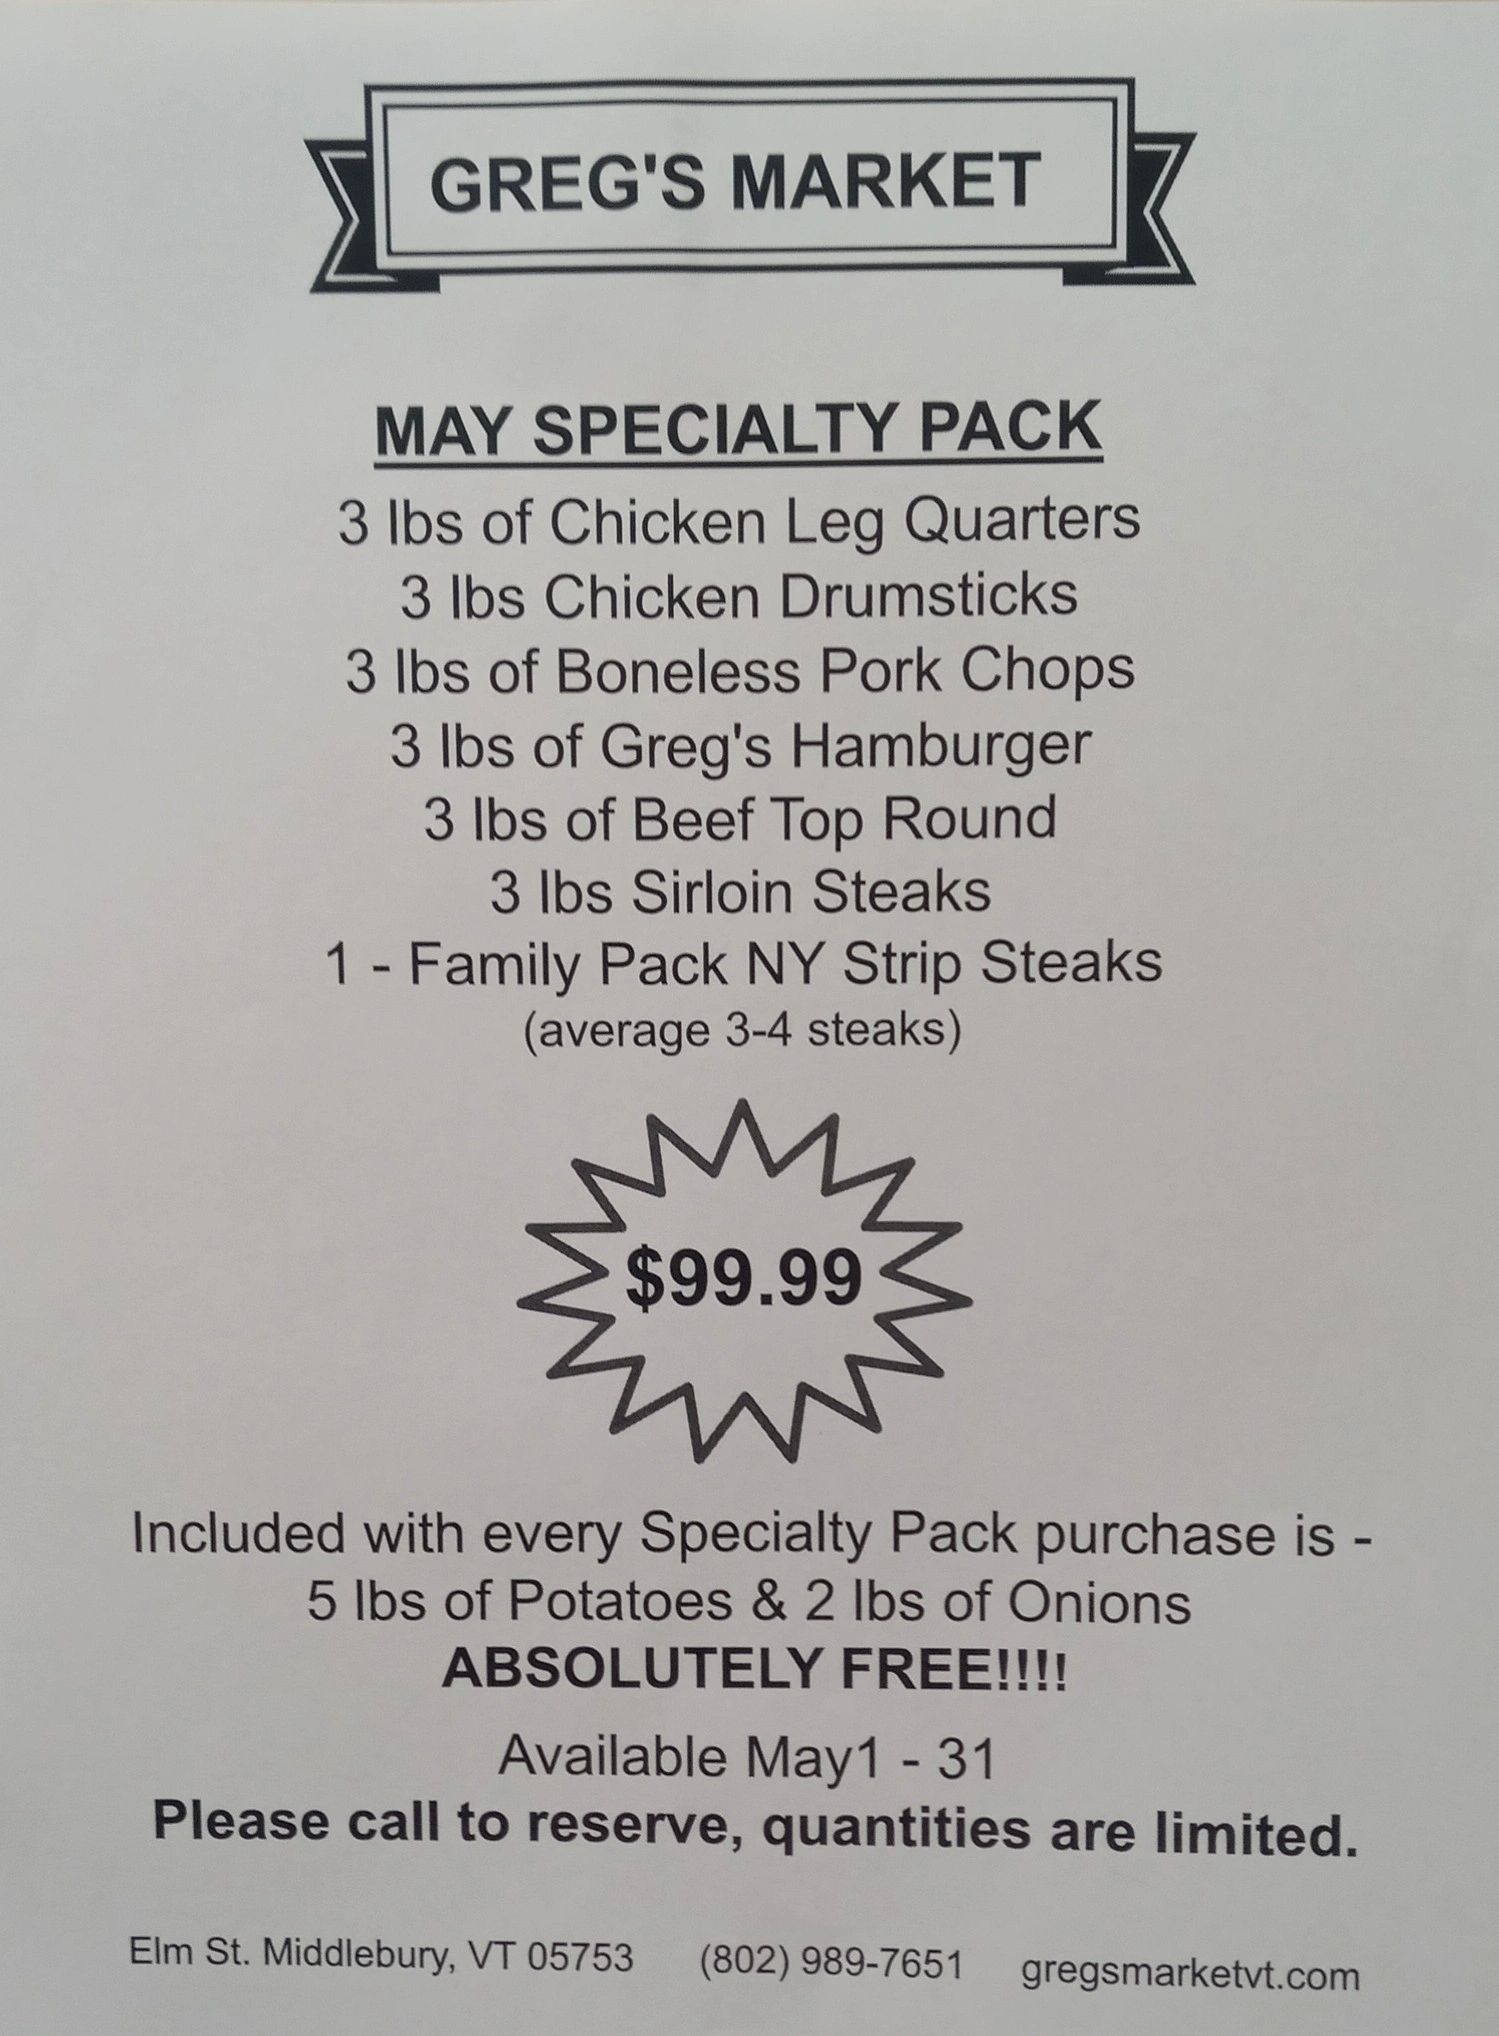 May special, may specialty package
